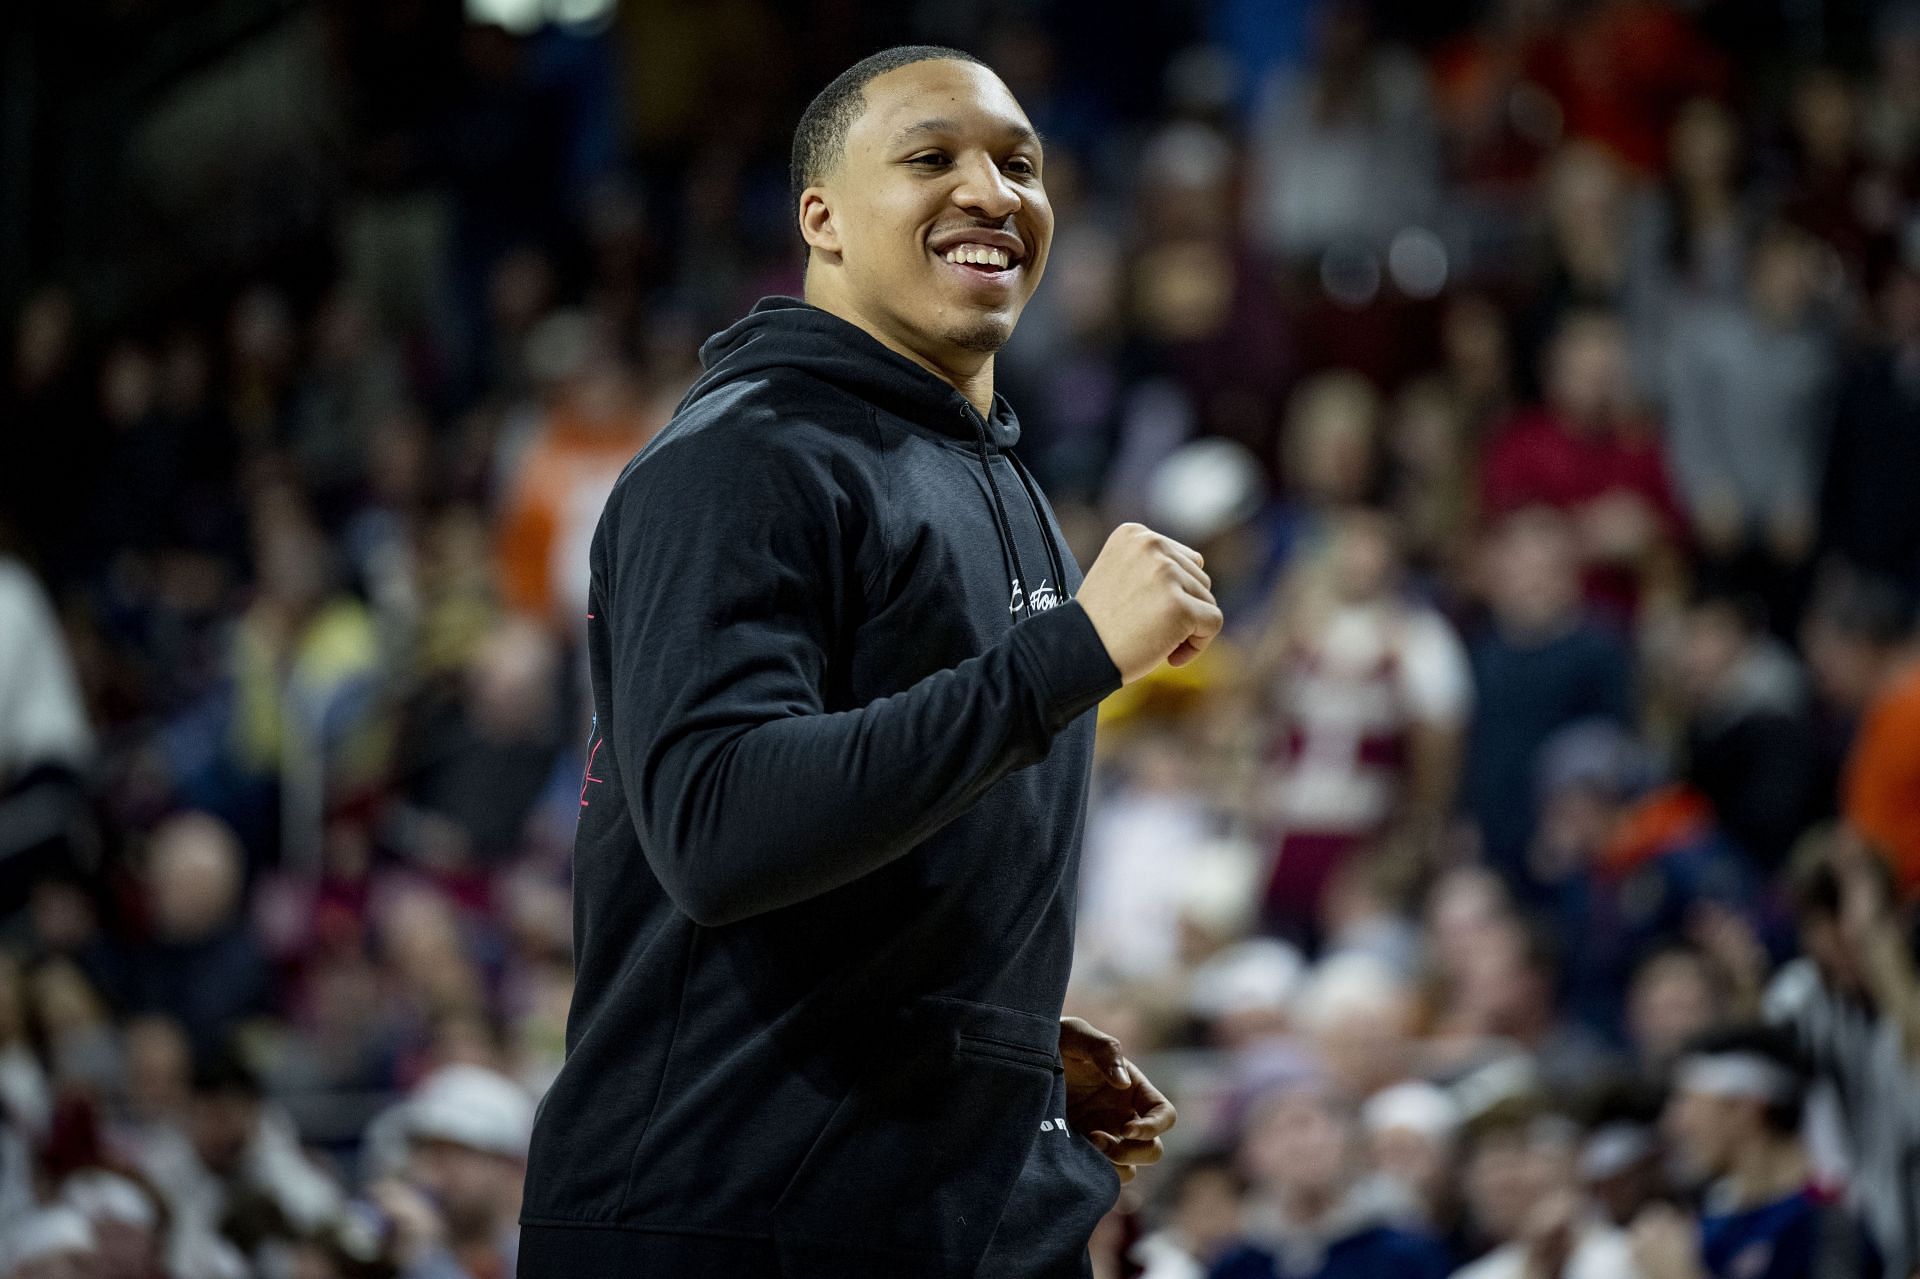 Mavericks finalizing trade for Grant Williams in 3-team deal with